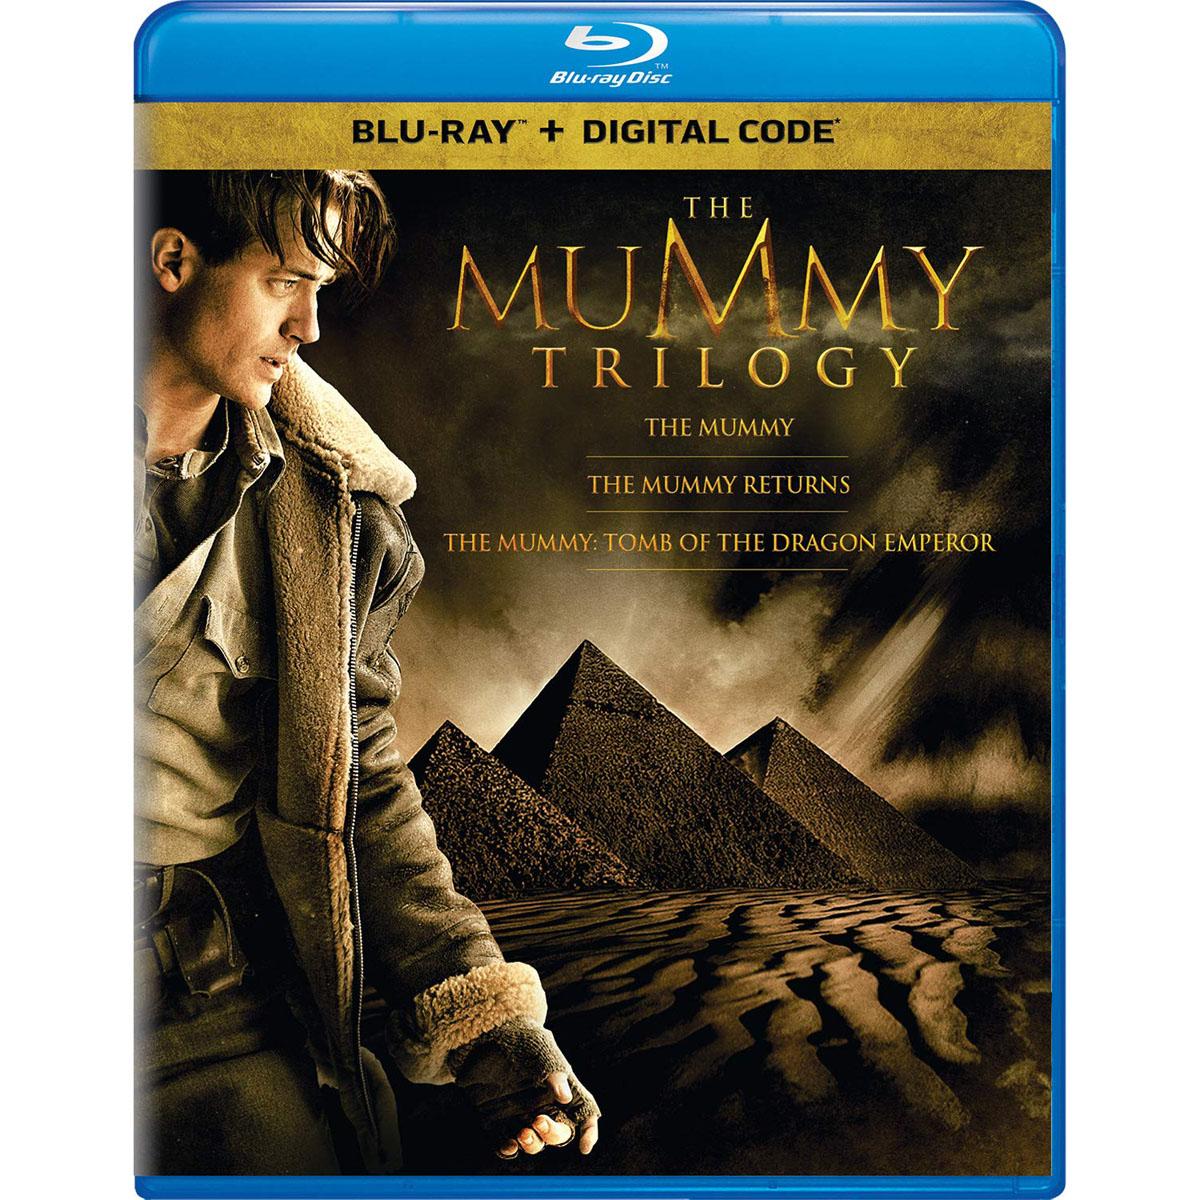 The Mummy Trilogy Blu-ray for $6.39